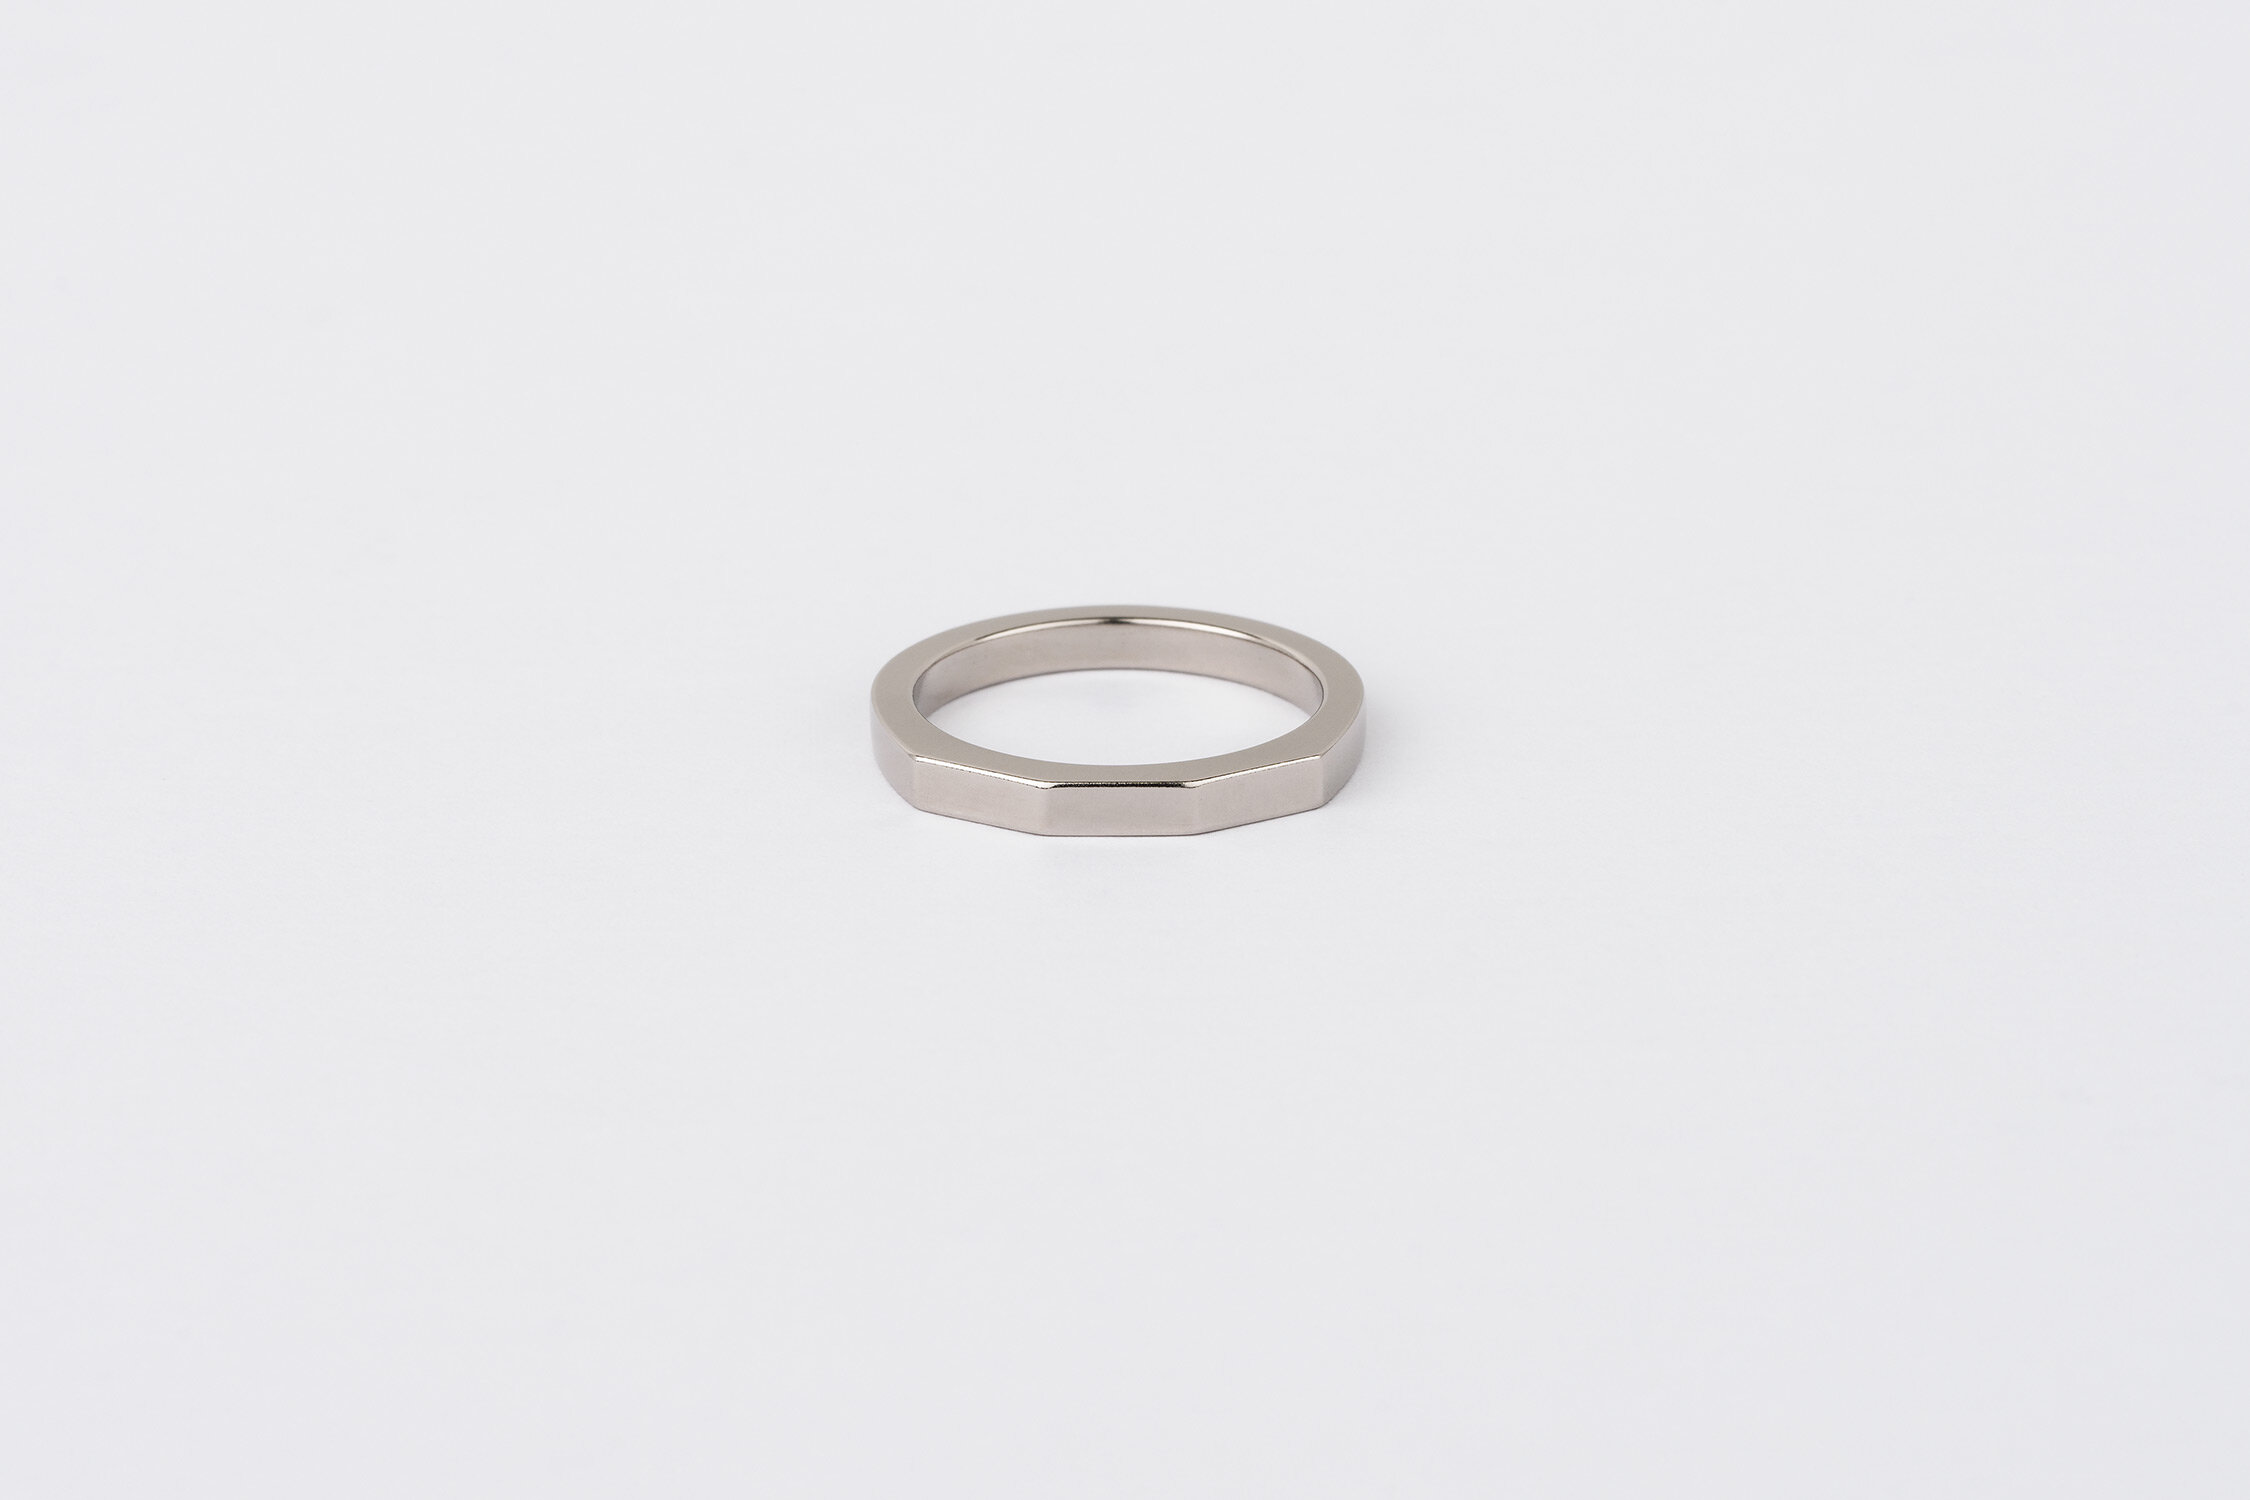  Fairtrade 18ct white gold minimal 3 faceted ring 